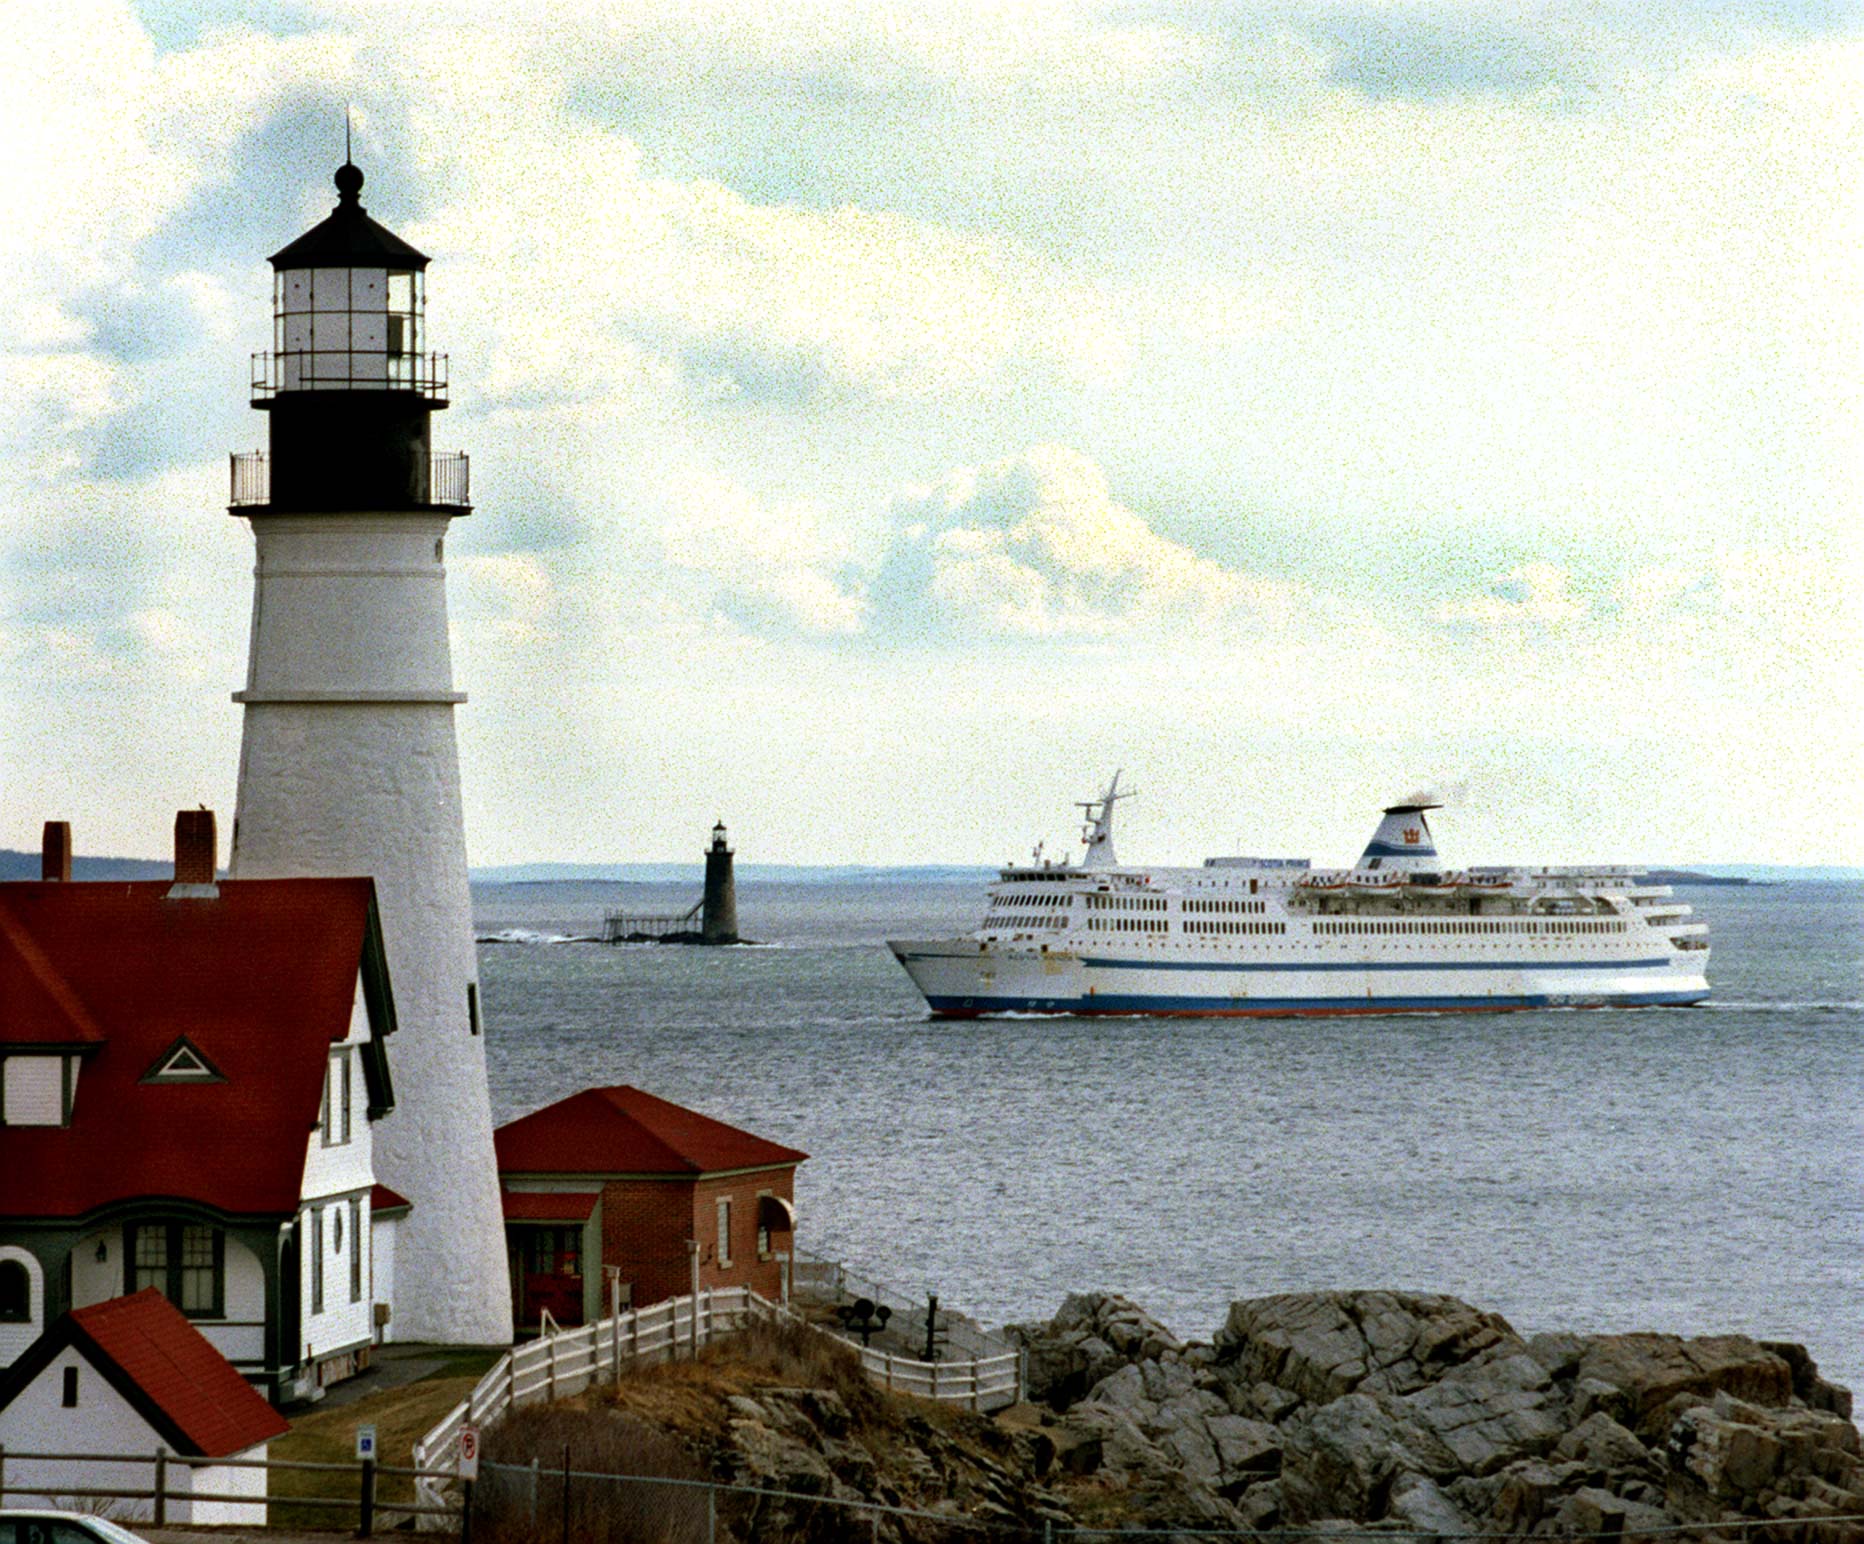 The Scotia Prince returns to Portland for the summer season on April 8, 1997. In the foreground is Portland Head light and Ram Is. light is in the background.